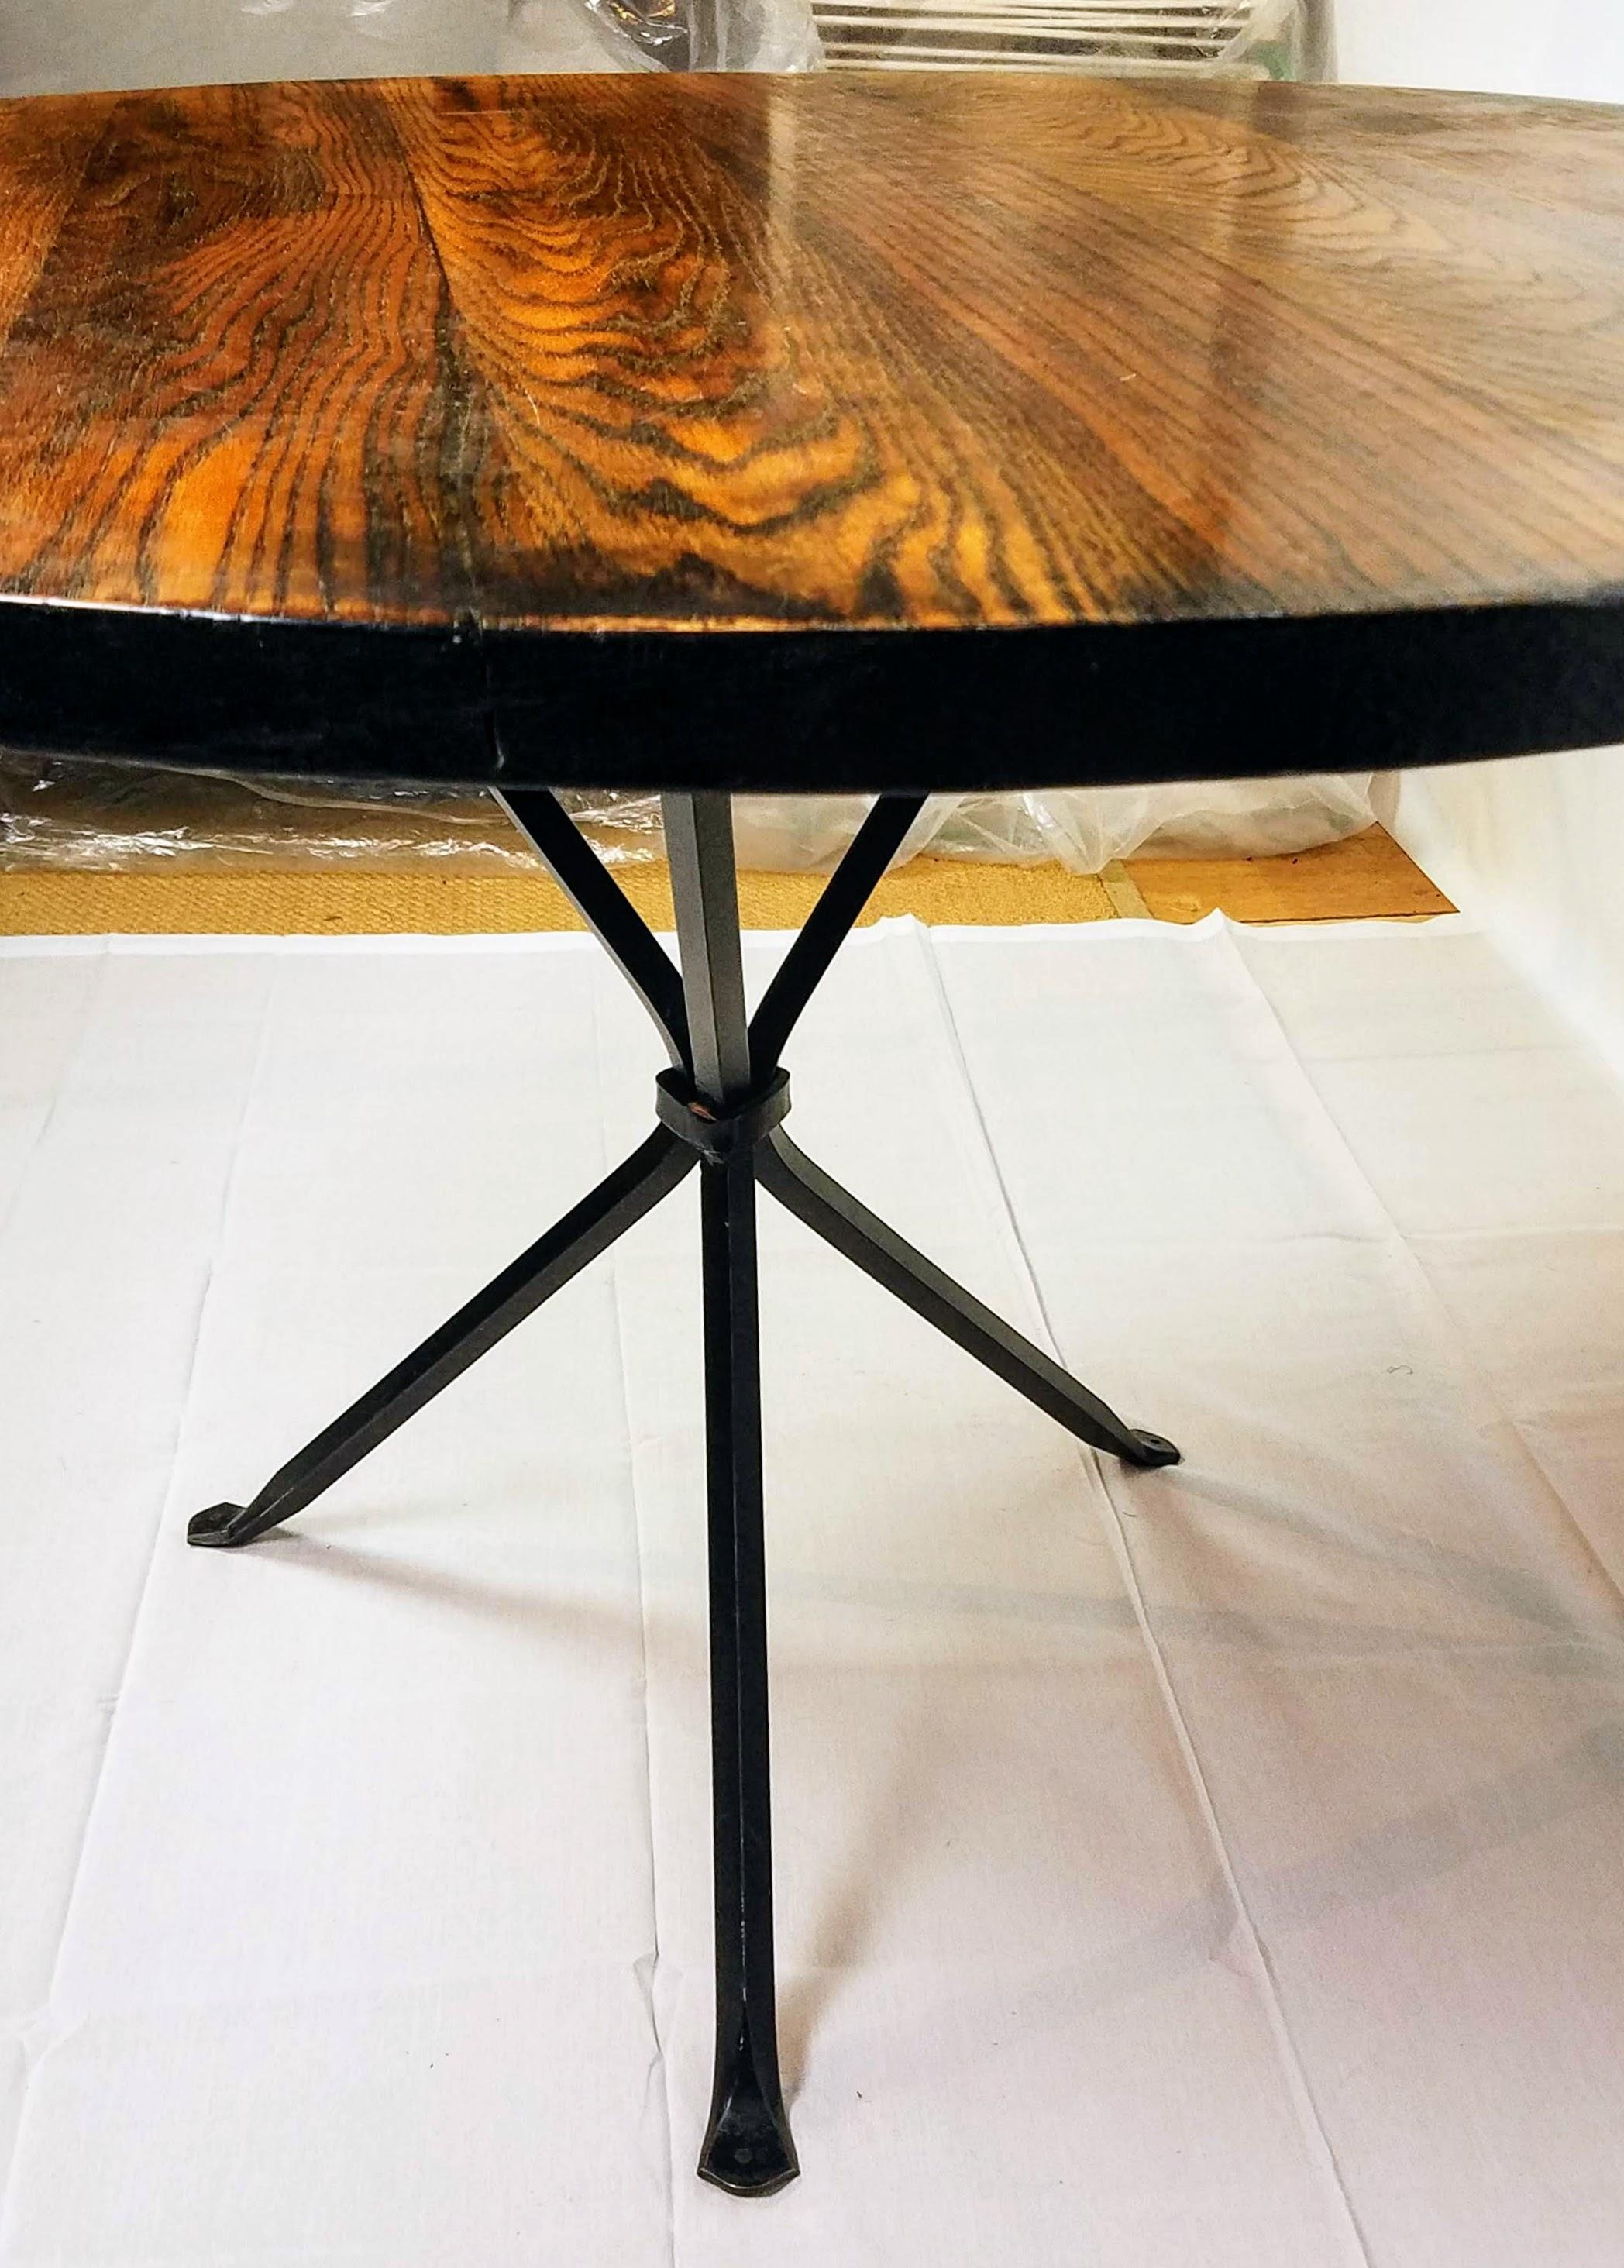 Cleo Baldon Wrought Iron Round Smoked Oak Dining Table El Monte, CA. c. 1968 For Sale 3